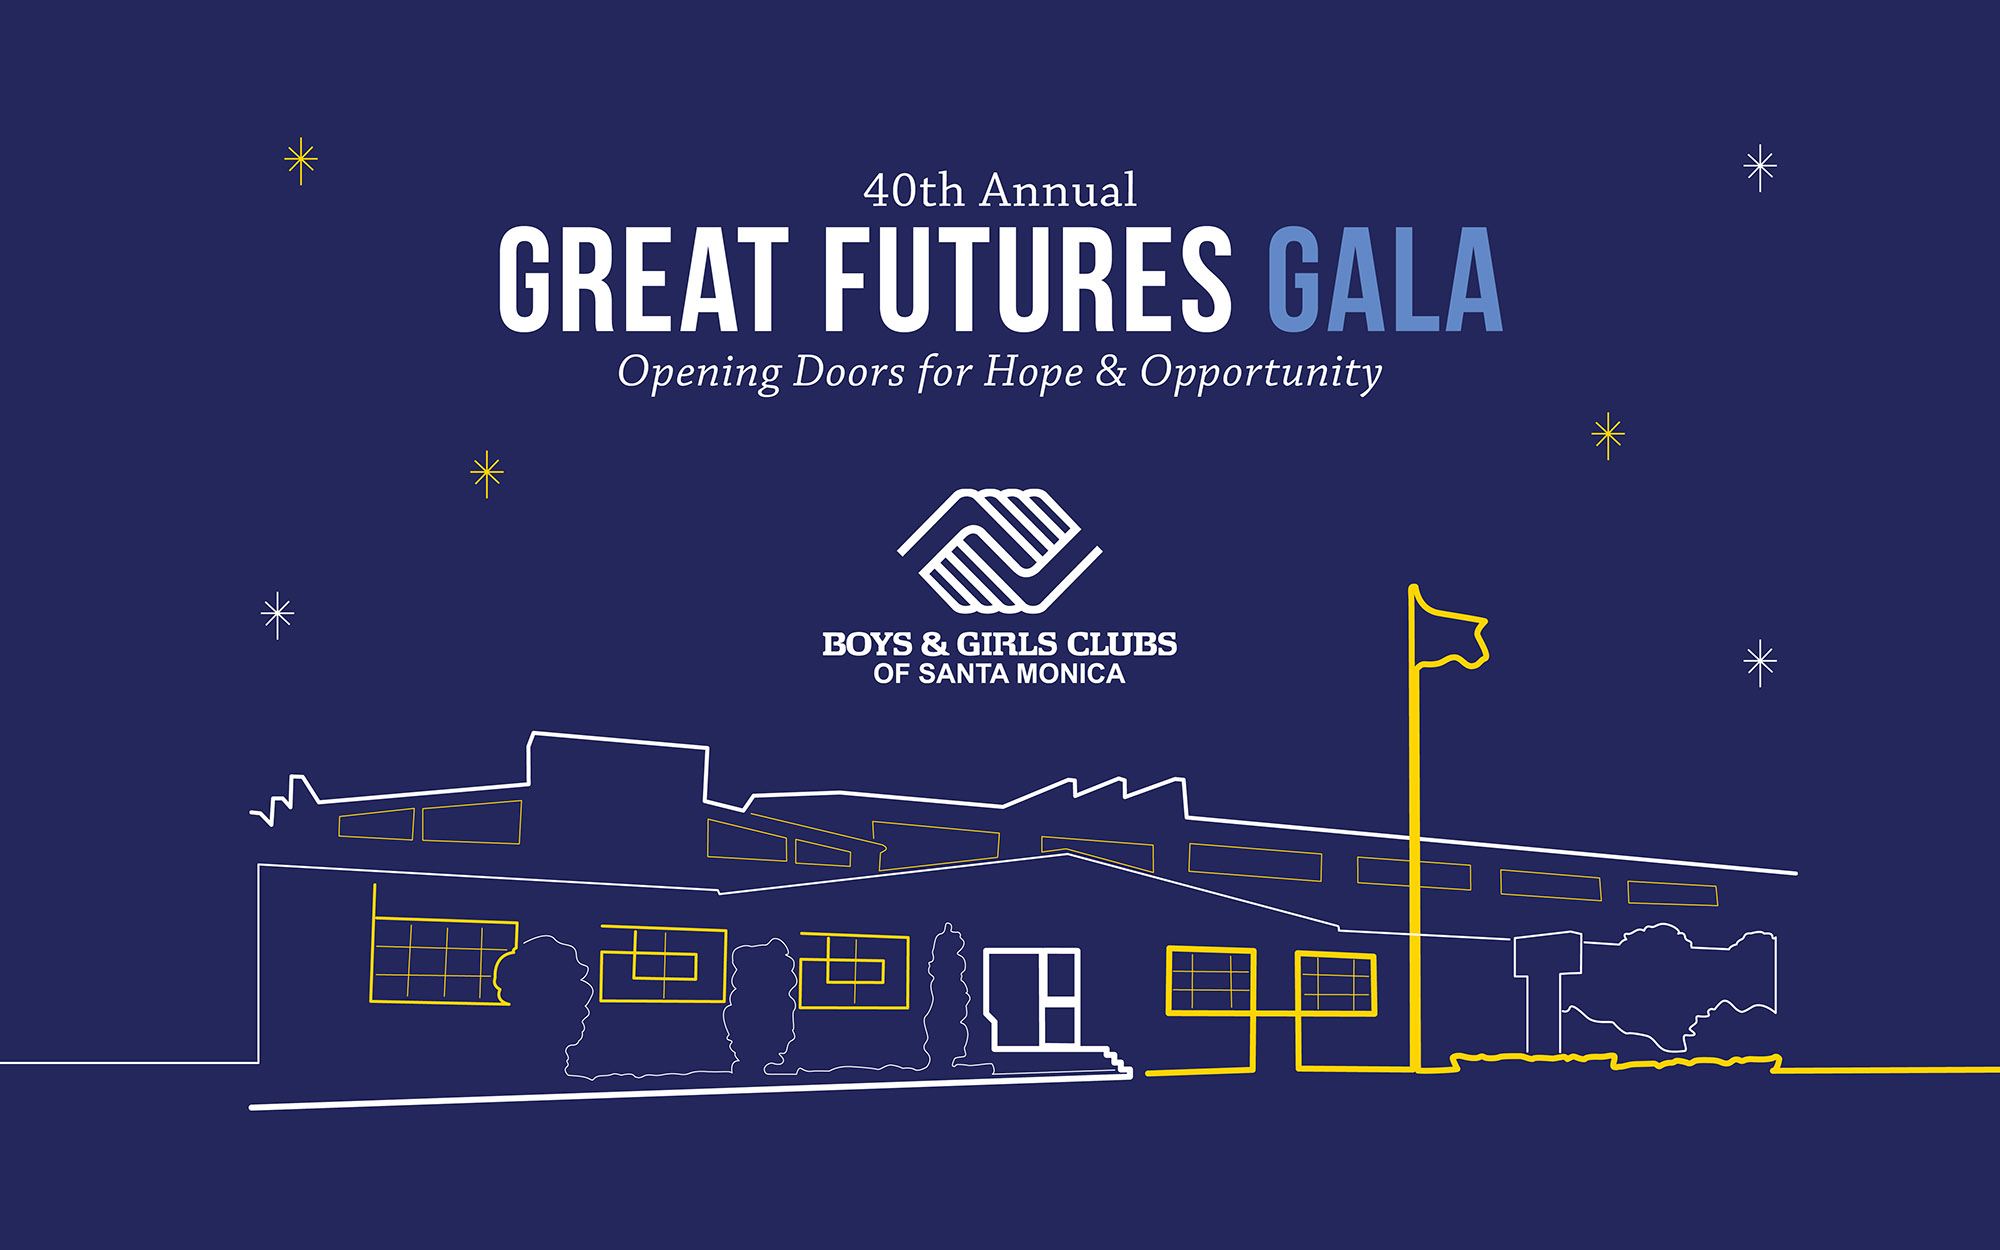 Our Great Futures Gala Trailer!